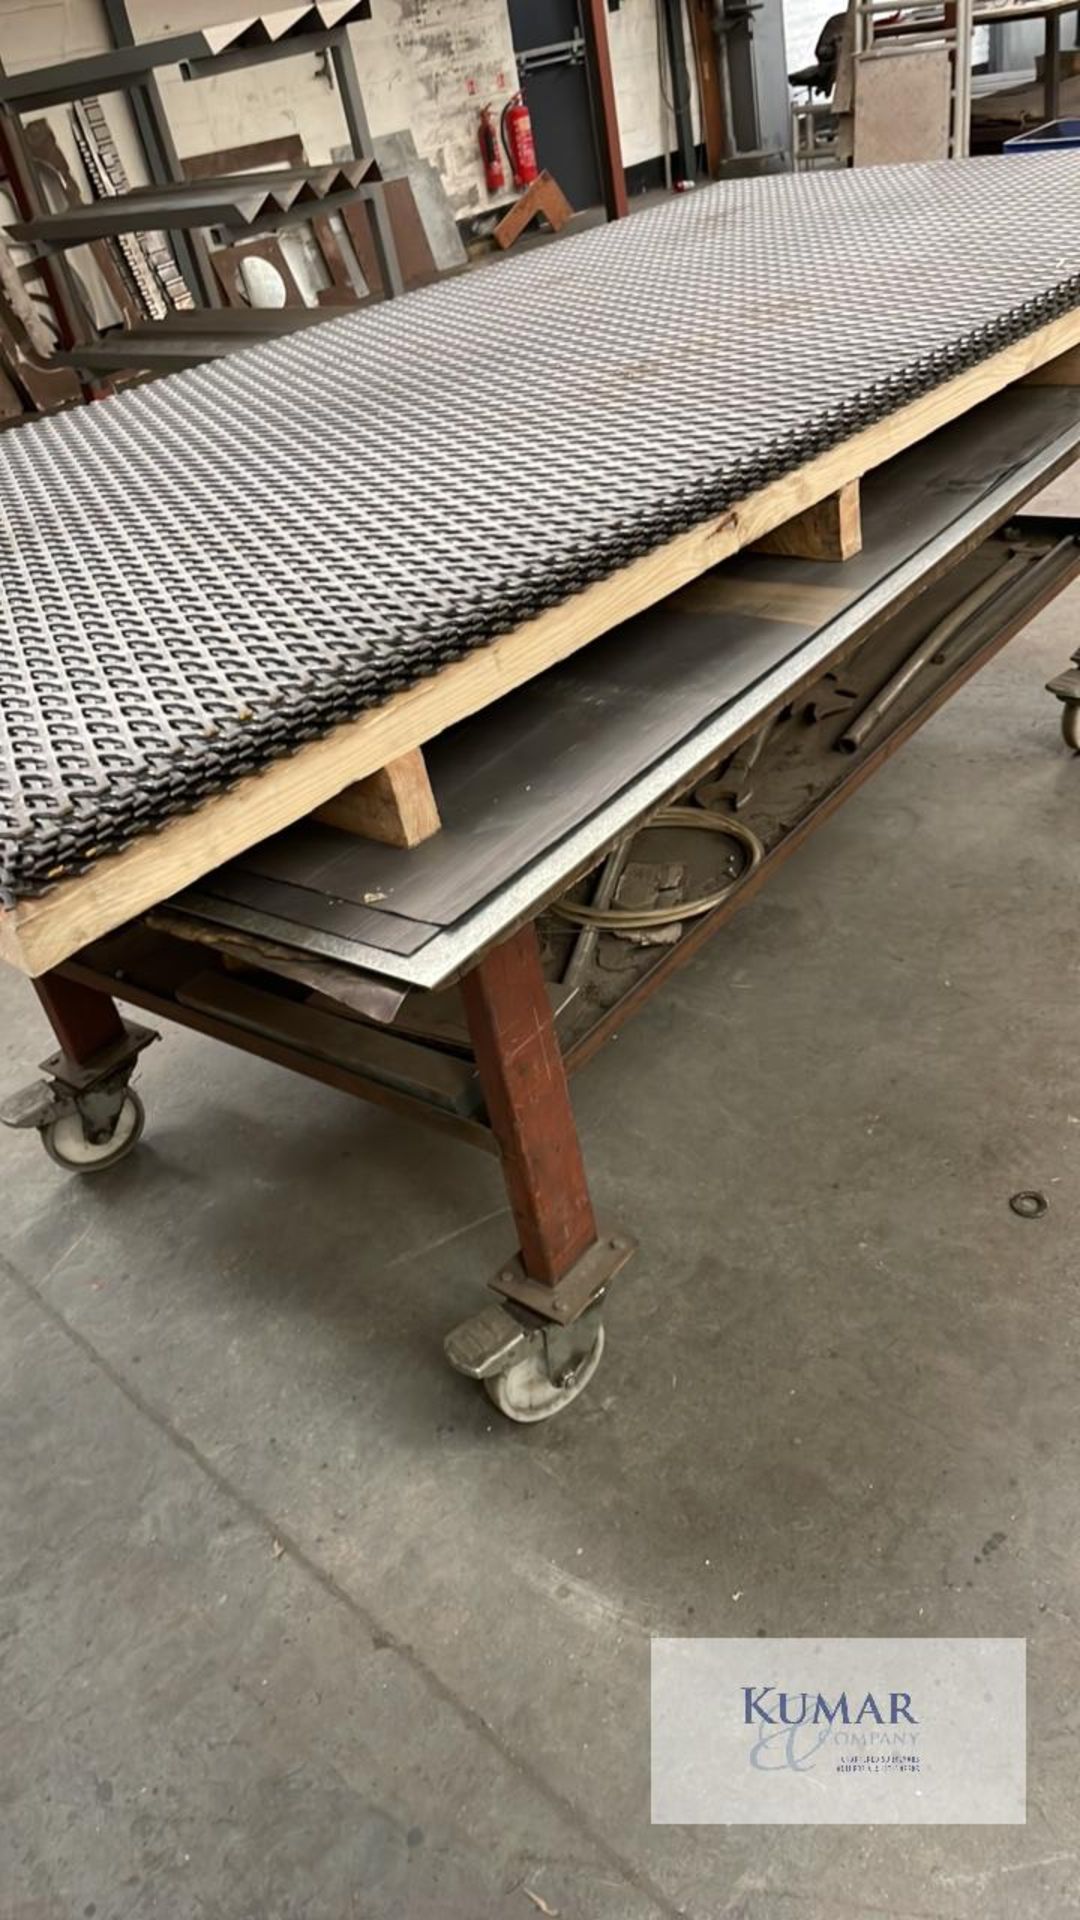 Sheet metal table on casters 1840mm long x 920mm wide 800mm high, with lower shelf Casters 150mm - Image 2 of 4